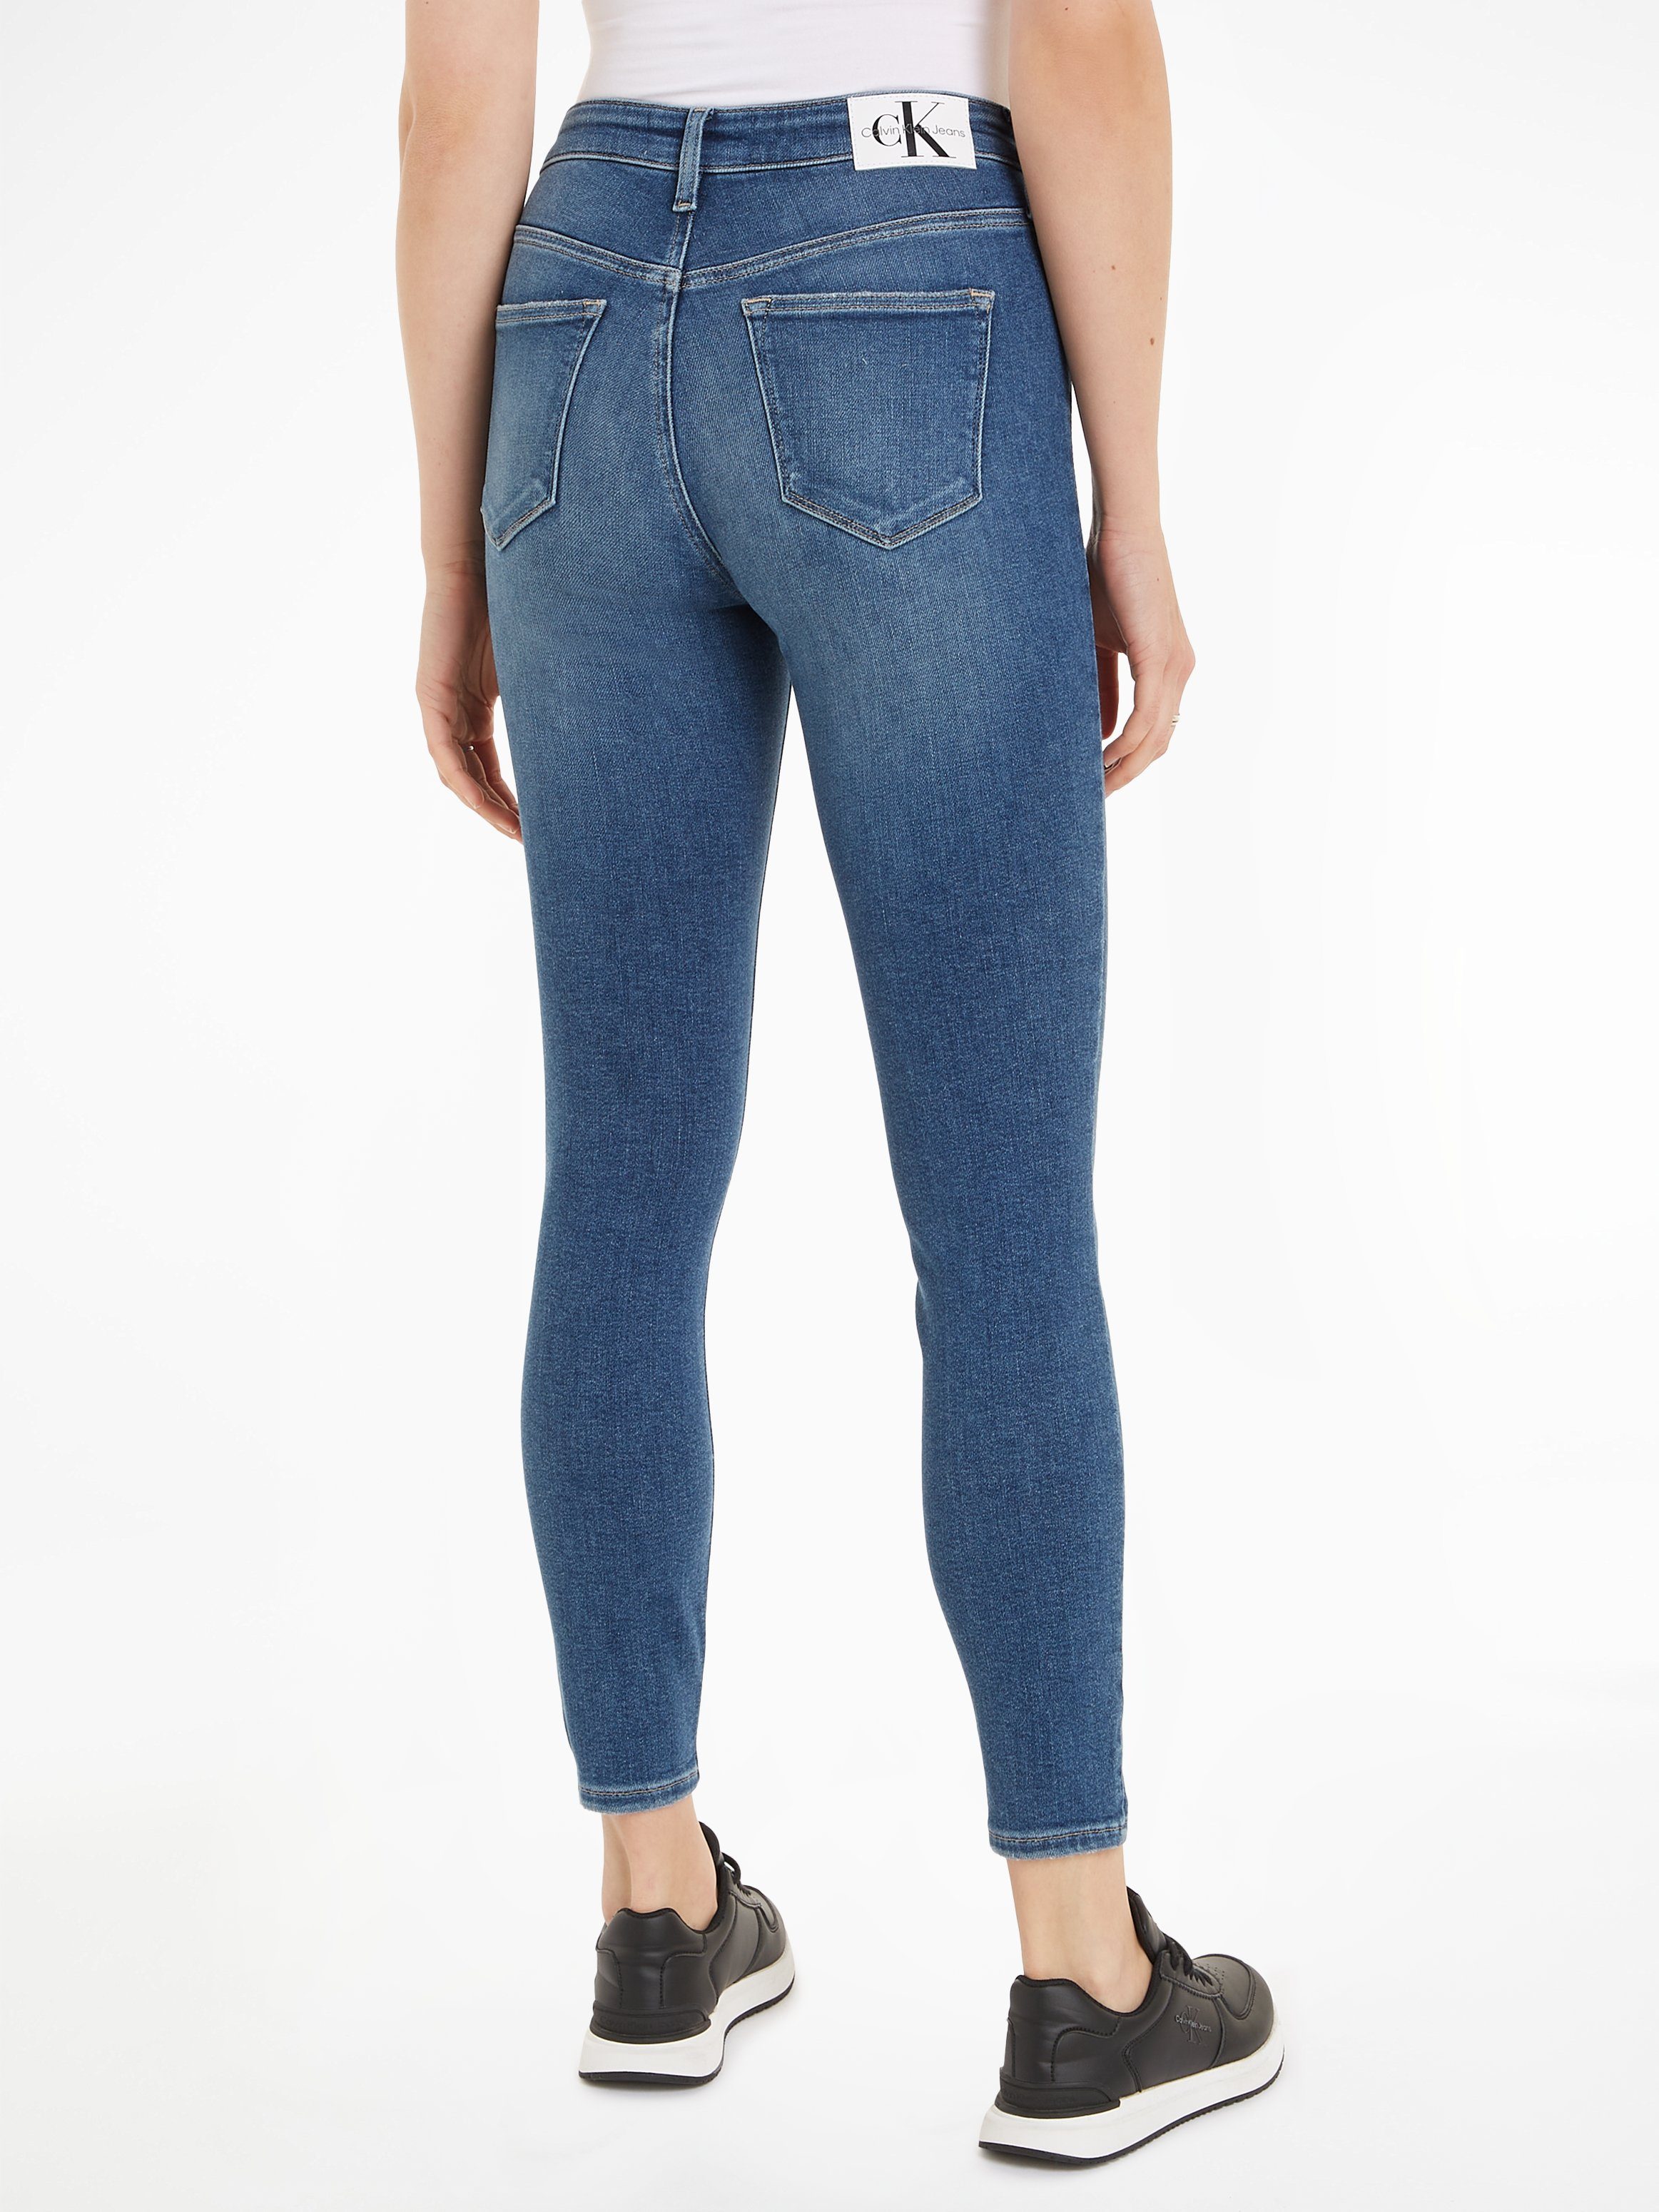 Calvin Klein RISE SUPER Jeans ANKLE HIGH Ankle-Jeans SKINNY